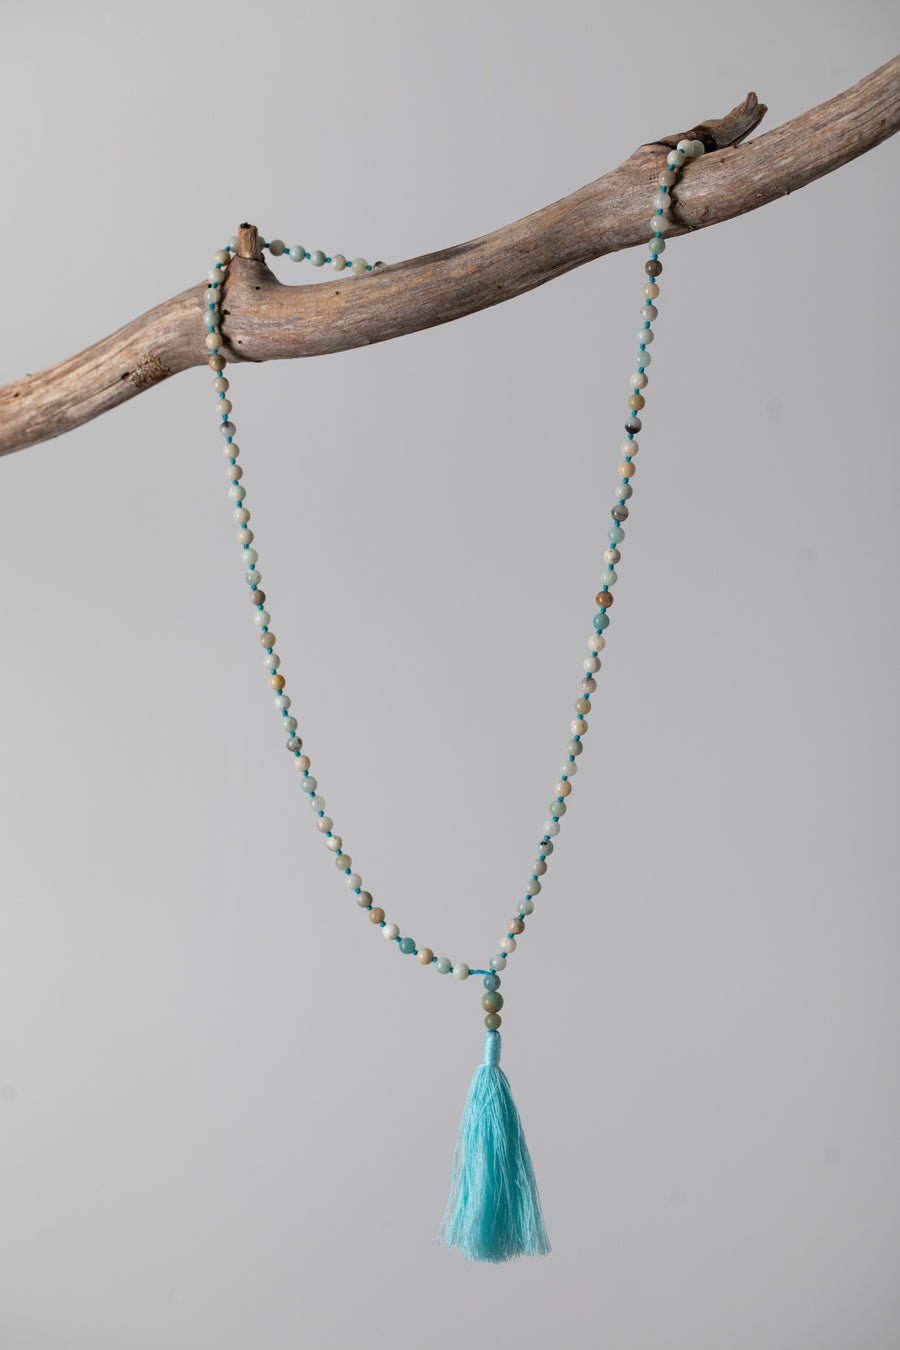 Zen Hand Knotted Beaded Gemstone Necklace